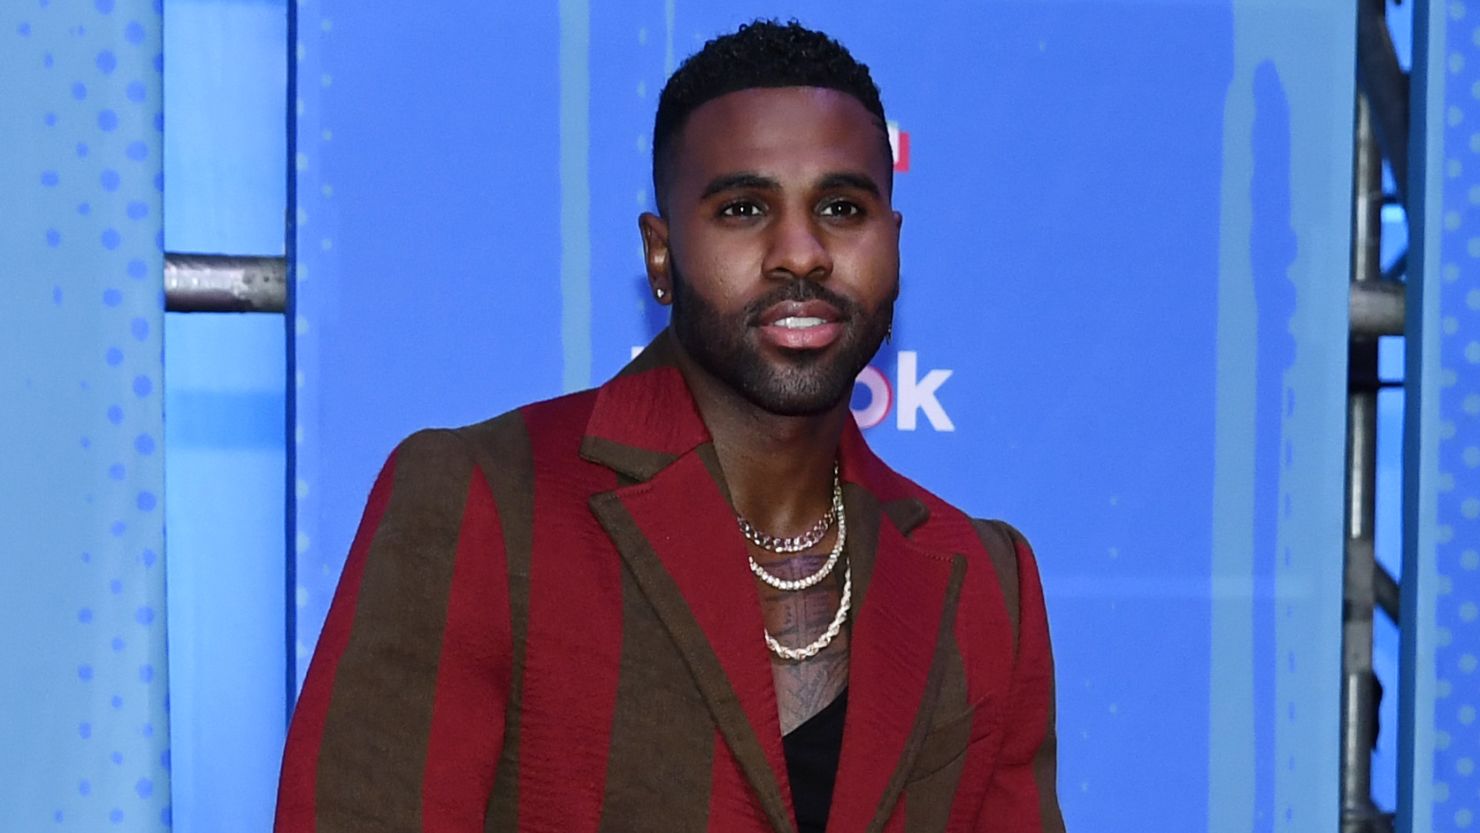 Jason Derulo attends an awards show in 2018. A suspect  has been arrested in relation to burglaries at the home of Derulo and others.